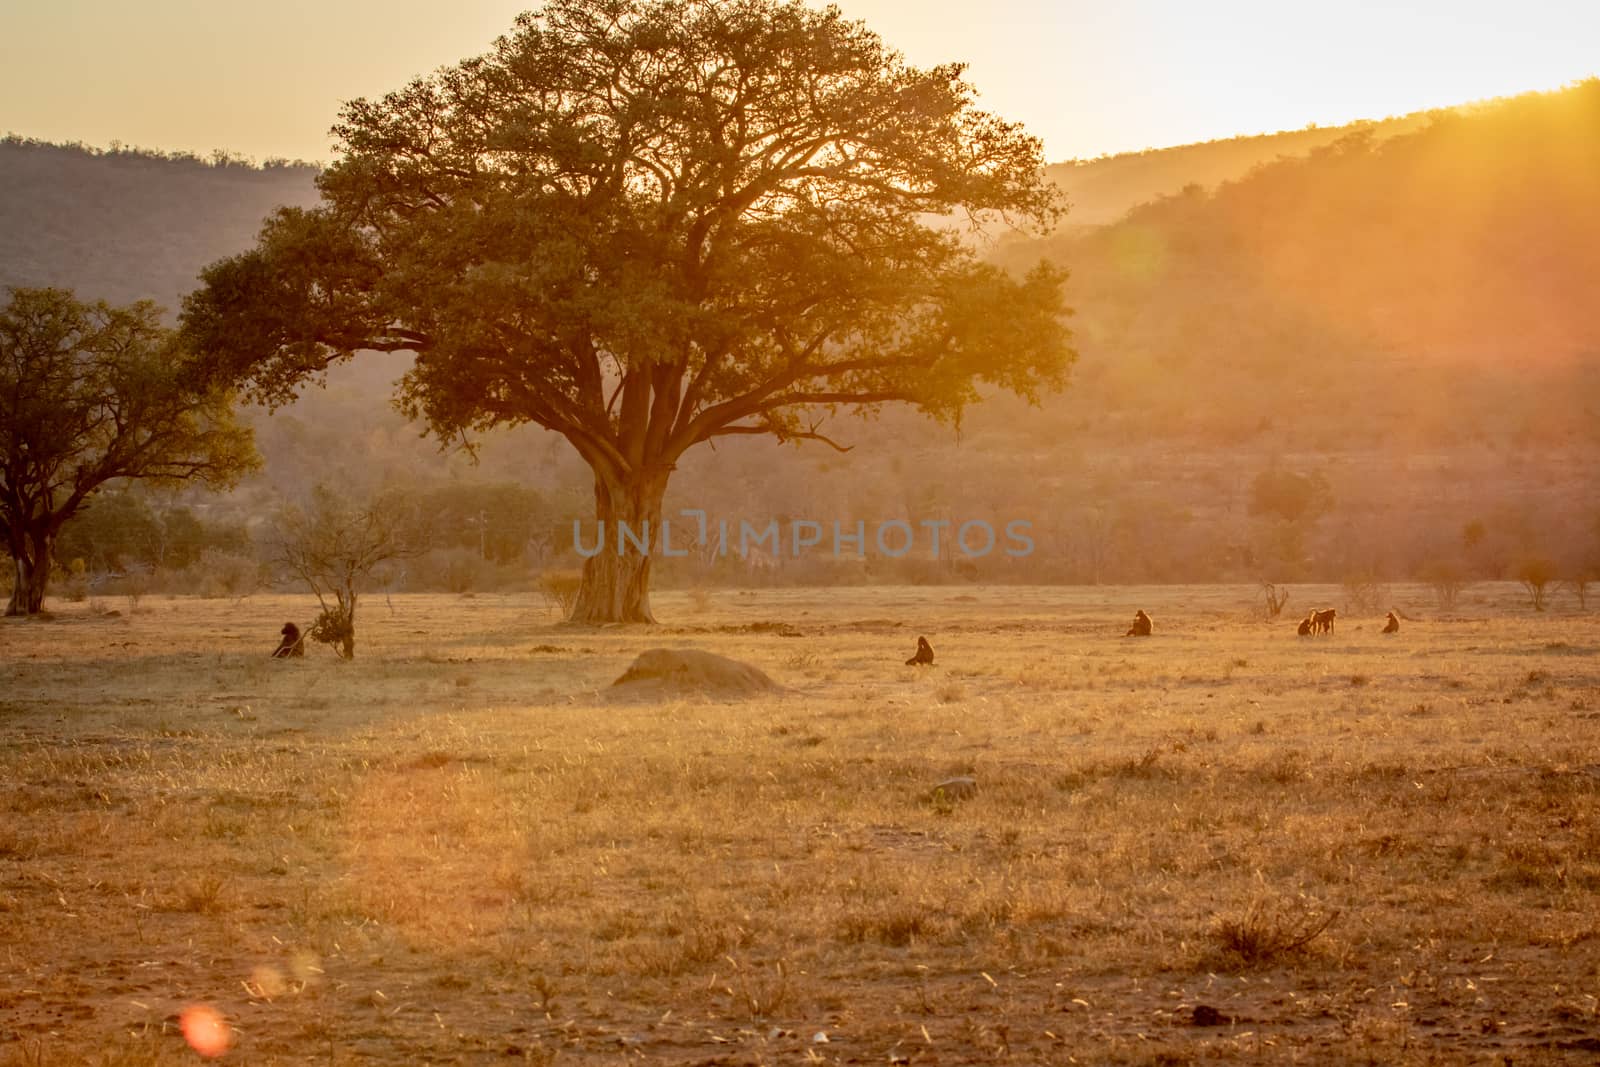 Sunset on a open plain with Chacma baboons in the Welgevonden game reserve, South Africa.